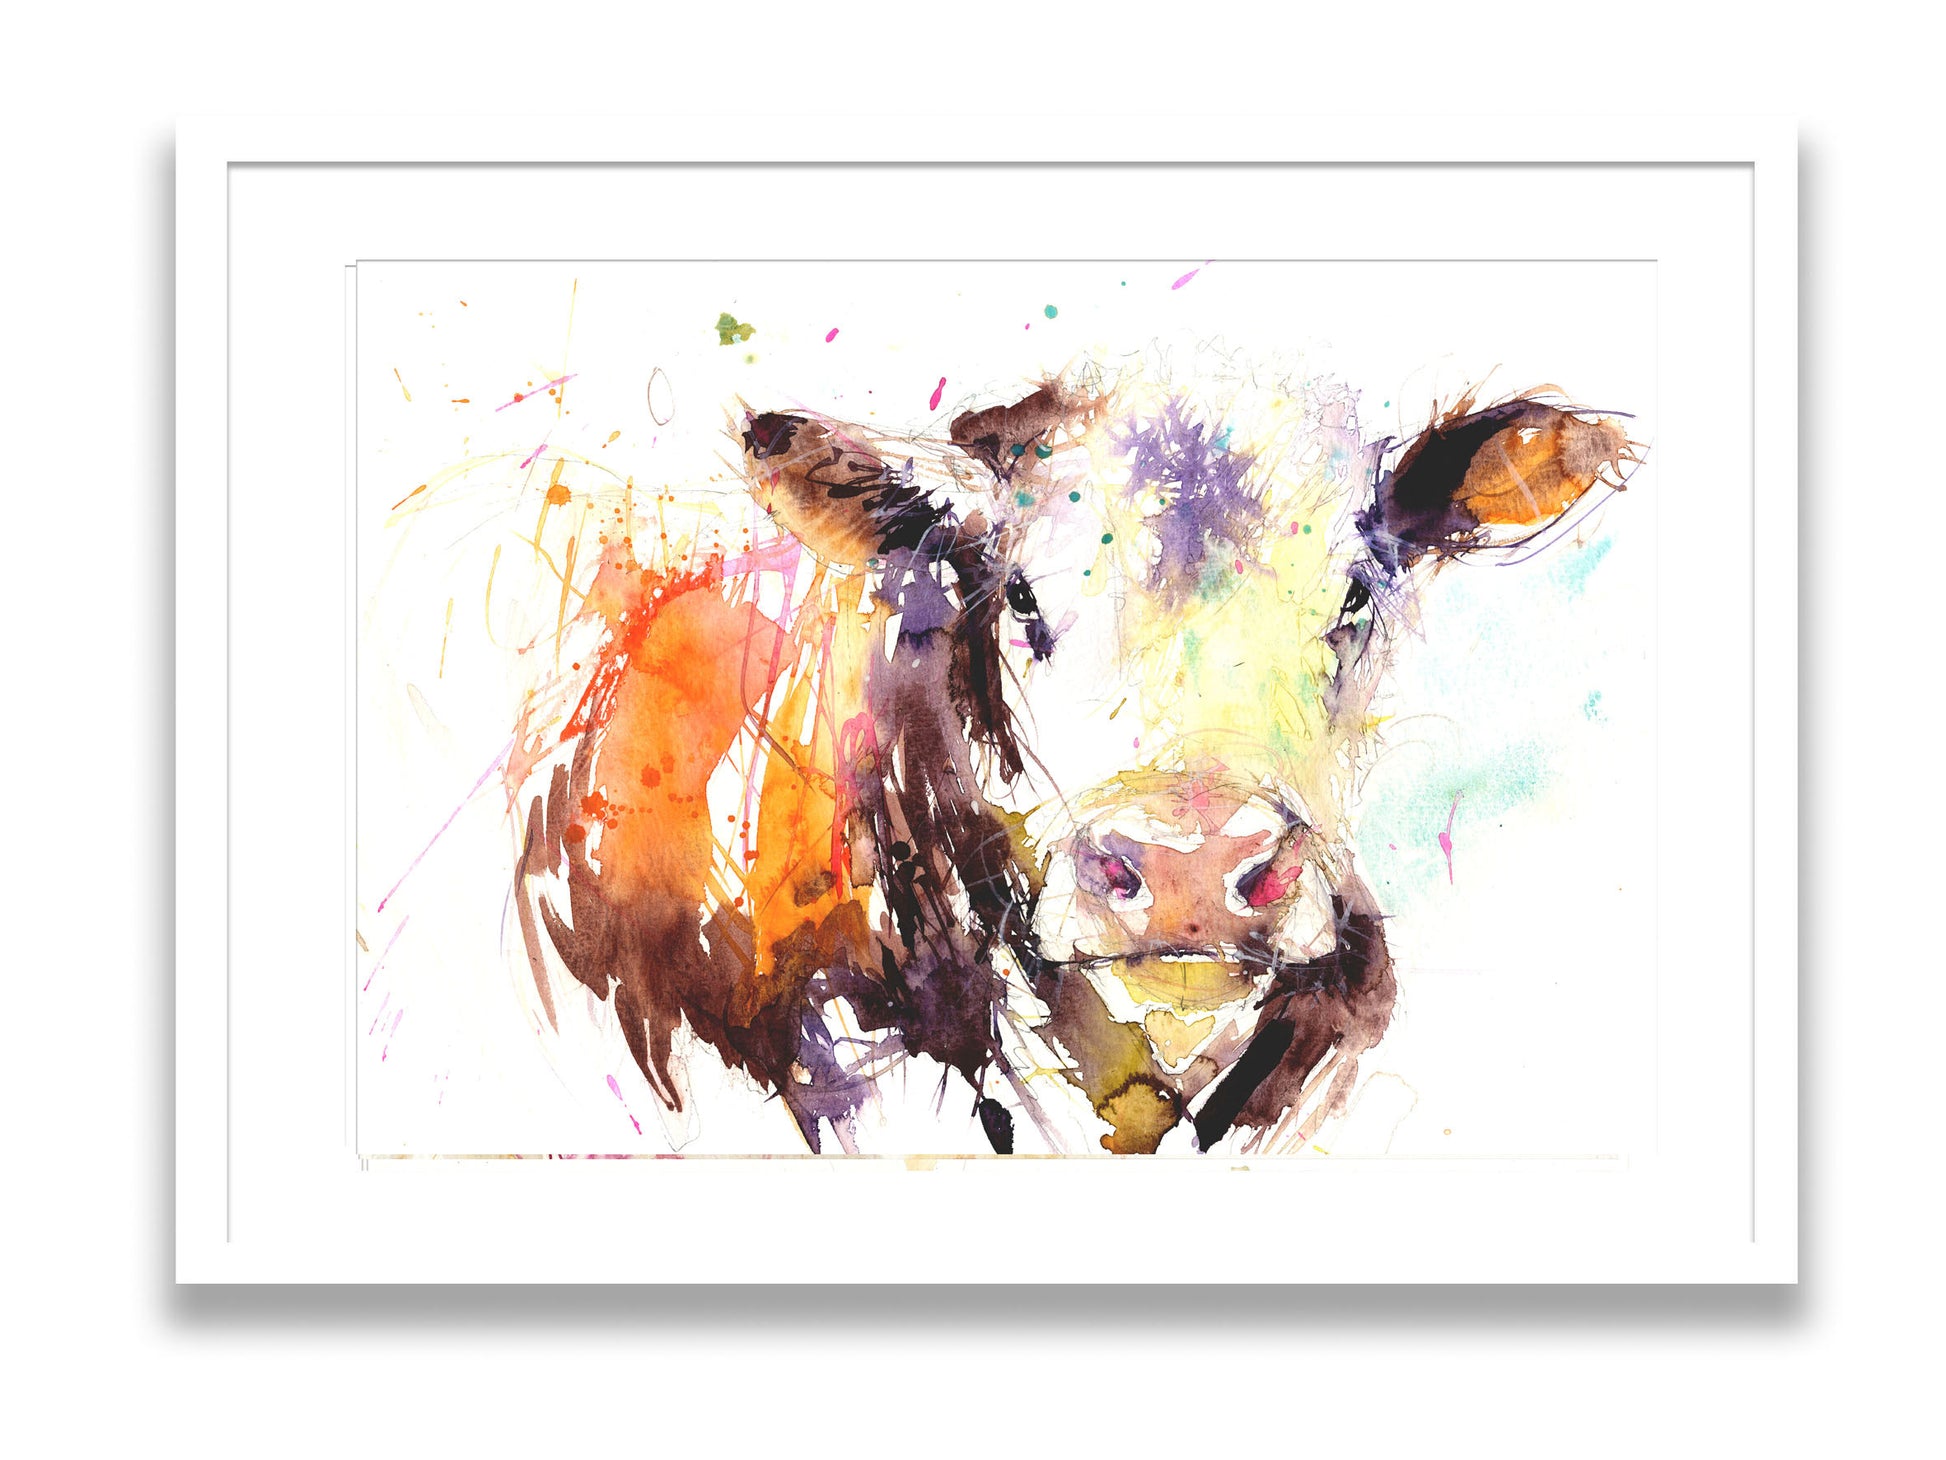 signed limited edition print - Hereford Cow - Jen Buckley Art limited edition animal art prints